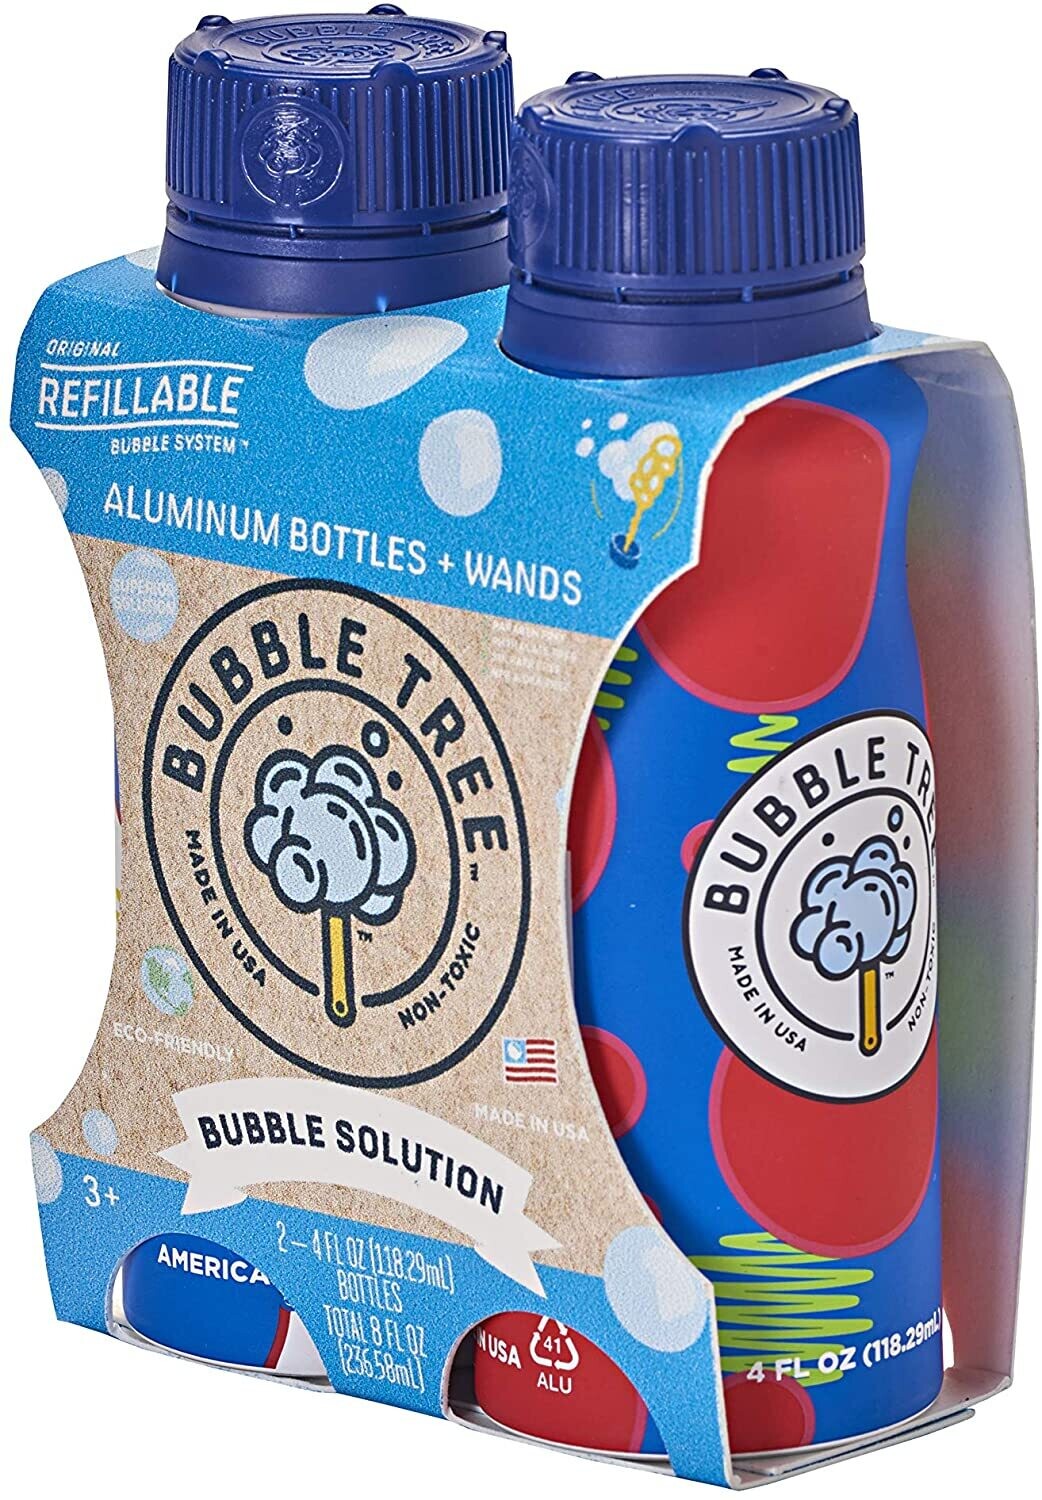 Bubble Tree two pack